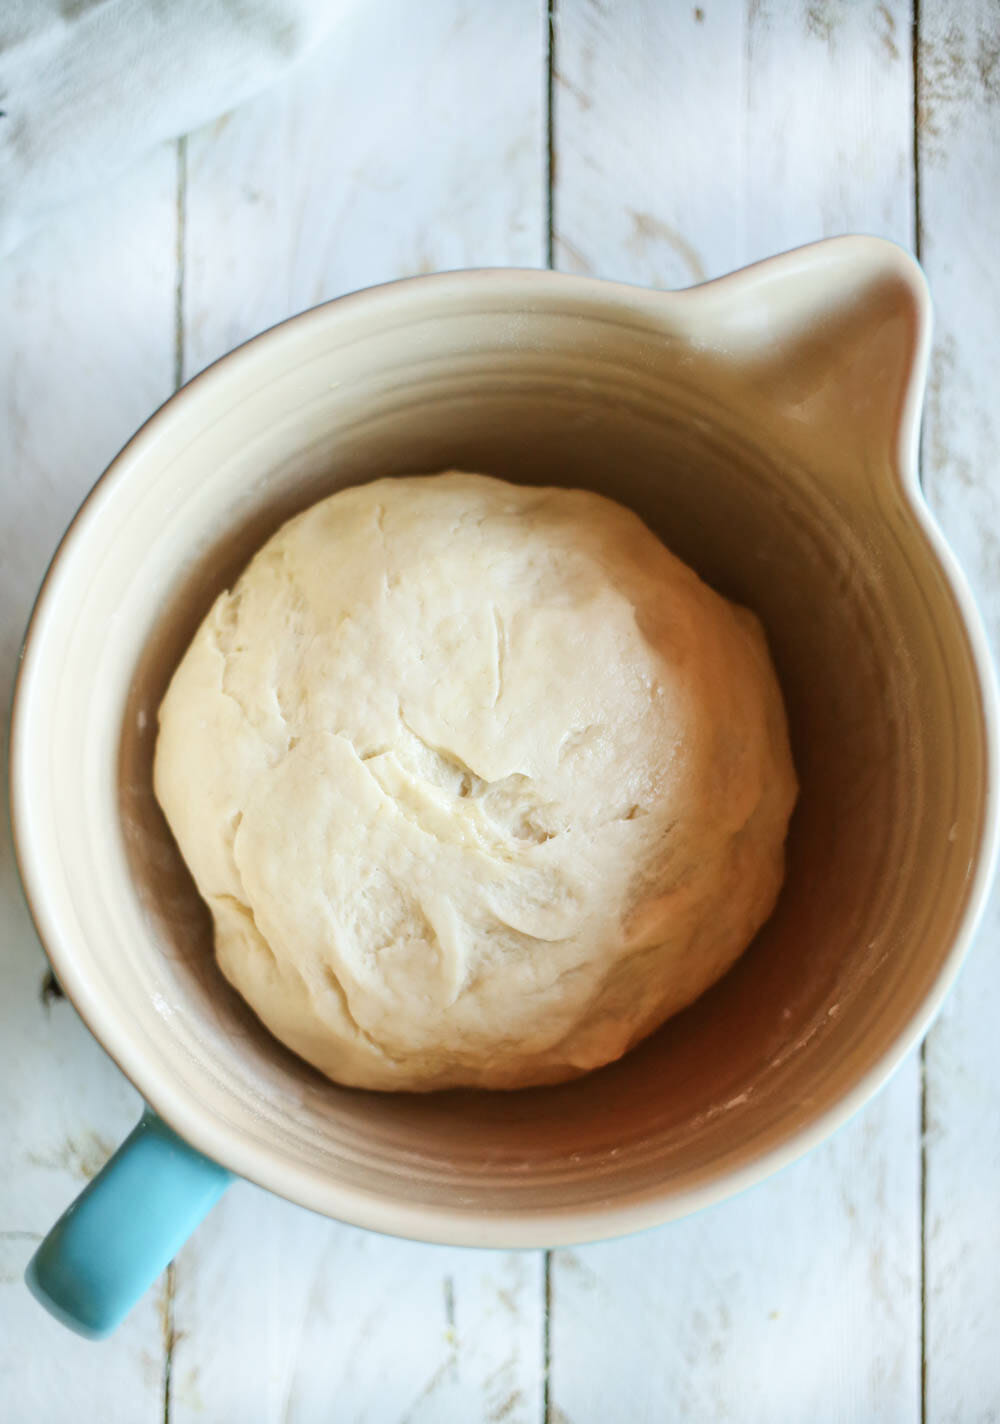 greased bowl with dough